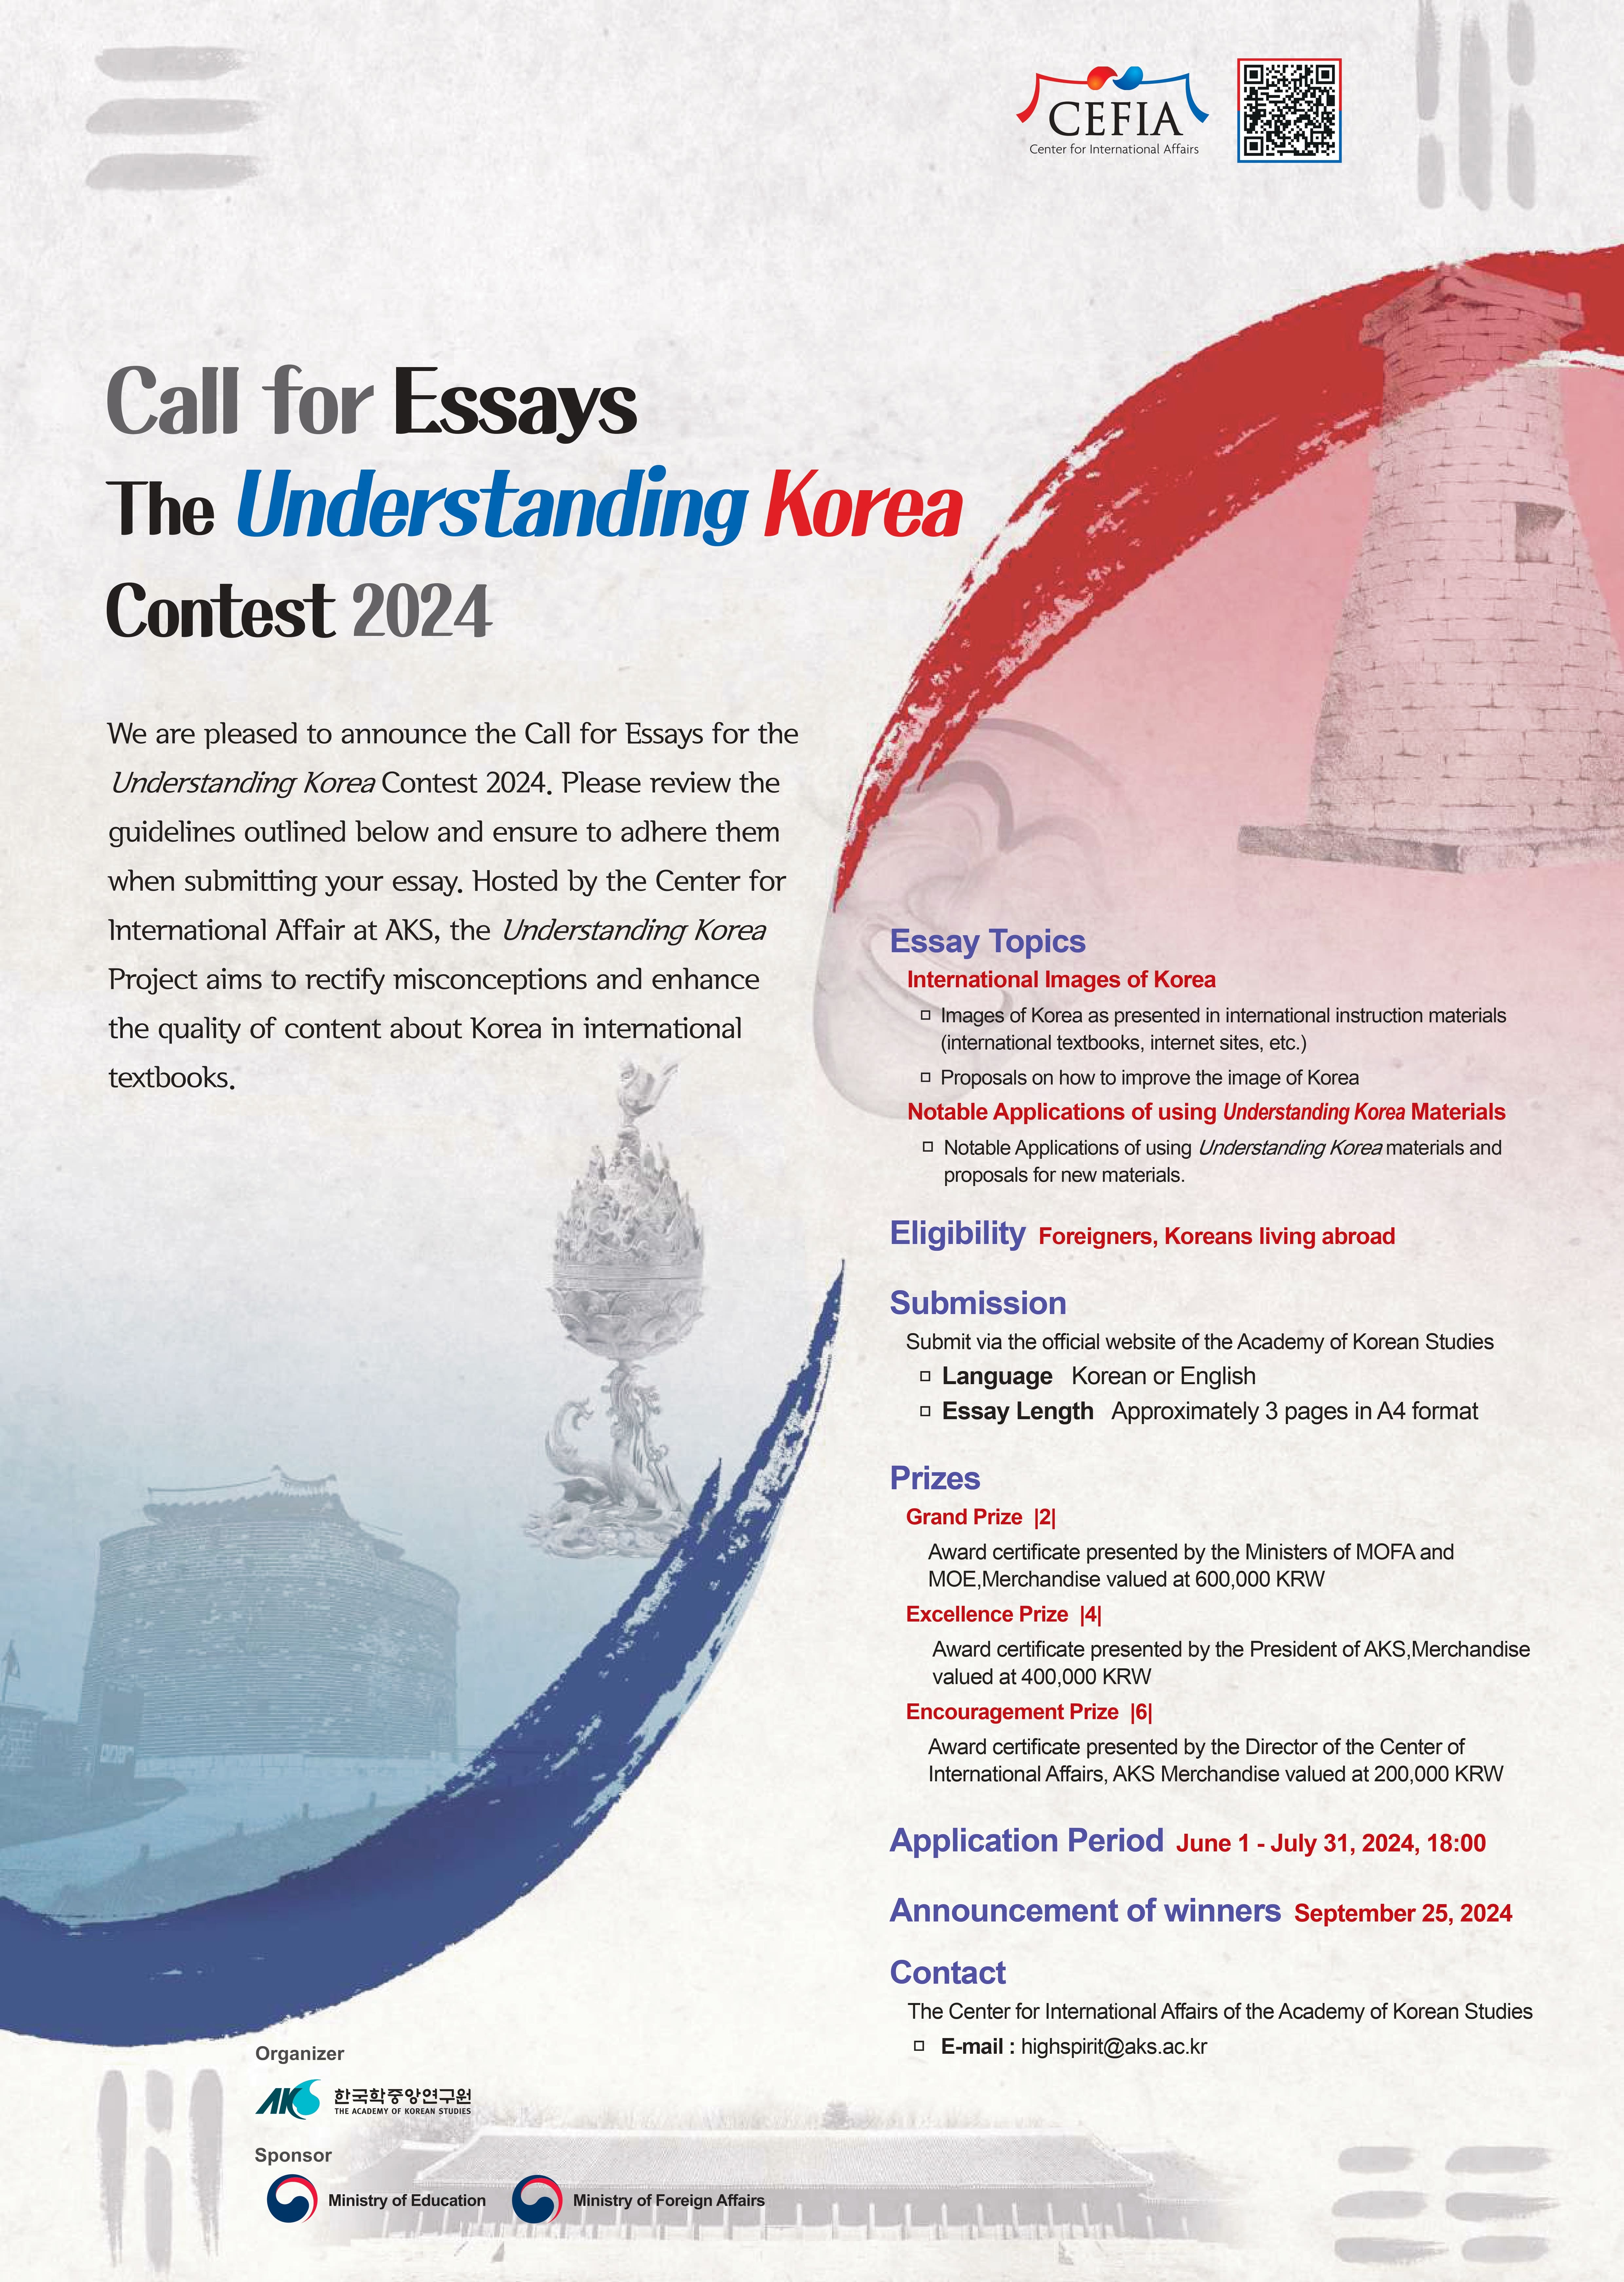 The Call for Essays for the Understanding Korea Contest 2024